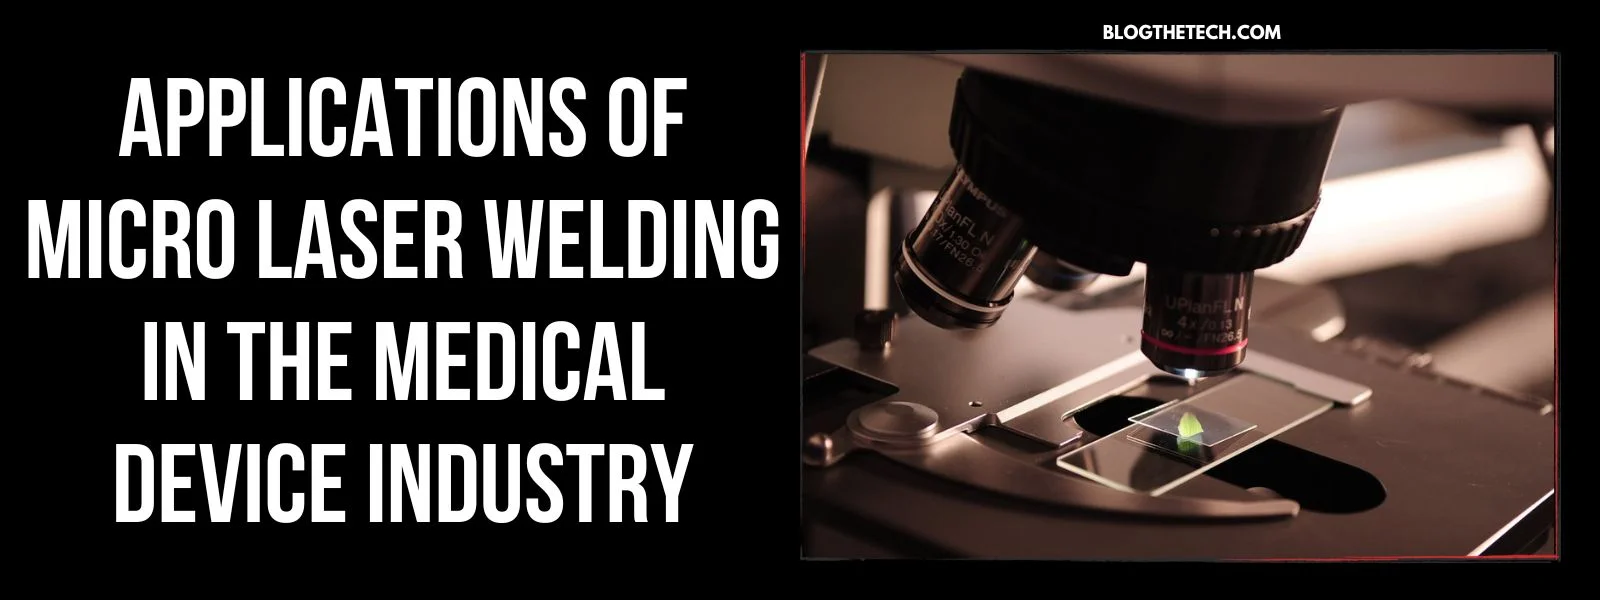 Applications of Micro Laser Welding in the Medical Device Industry